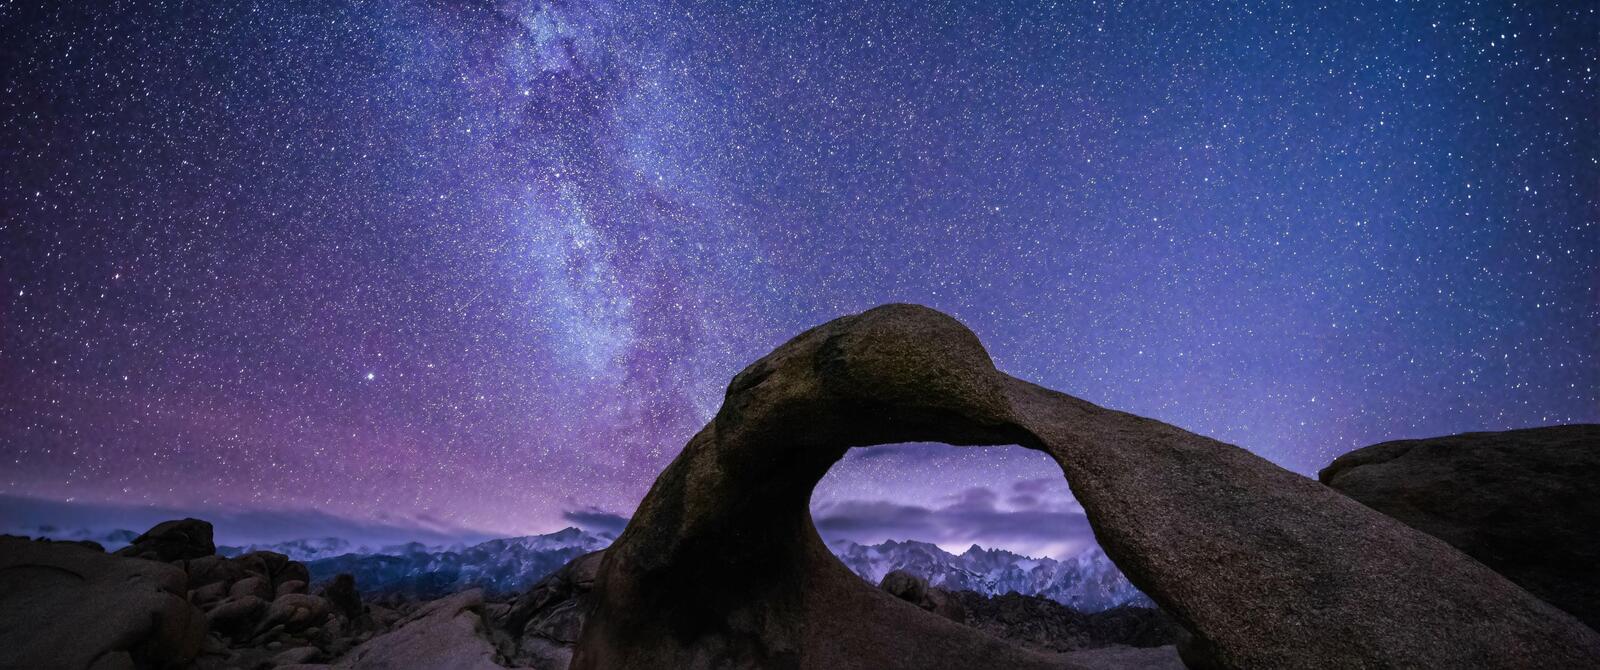 Free photo The night sky in the mountains